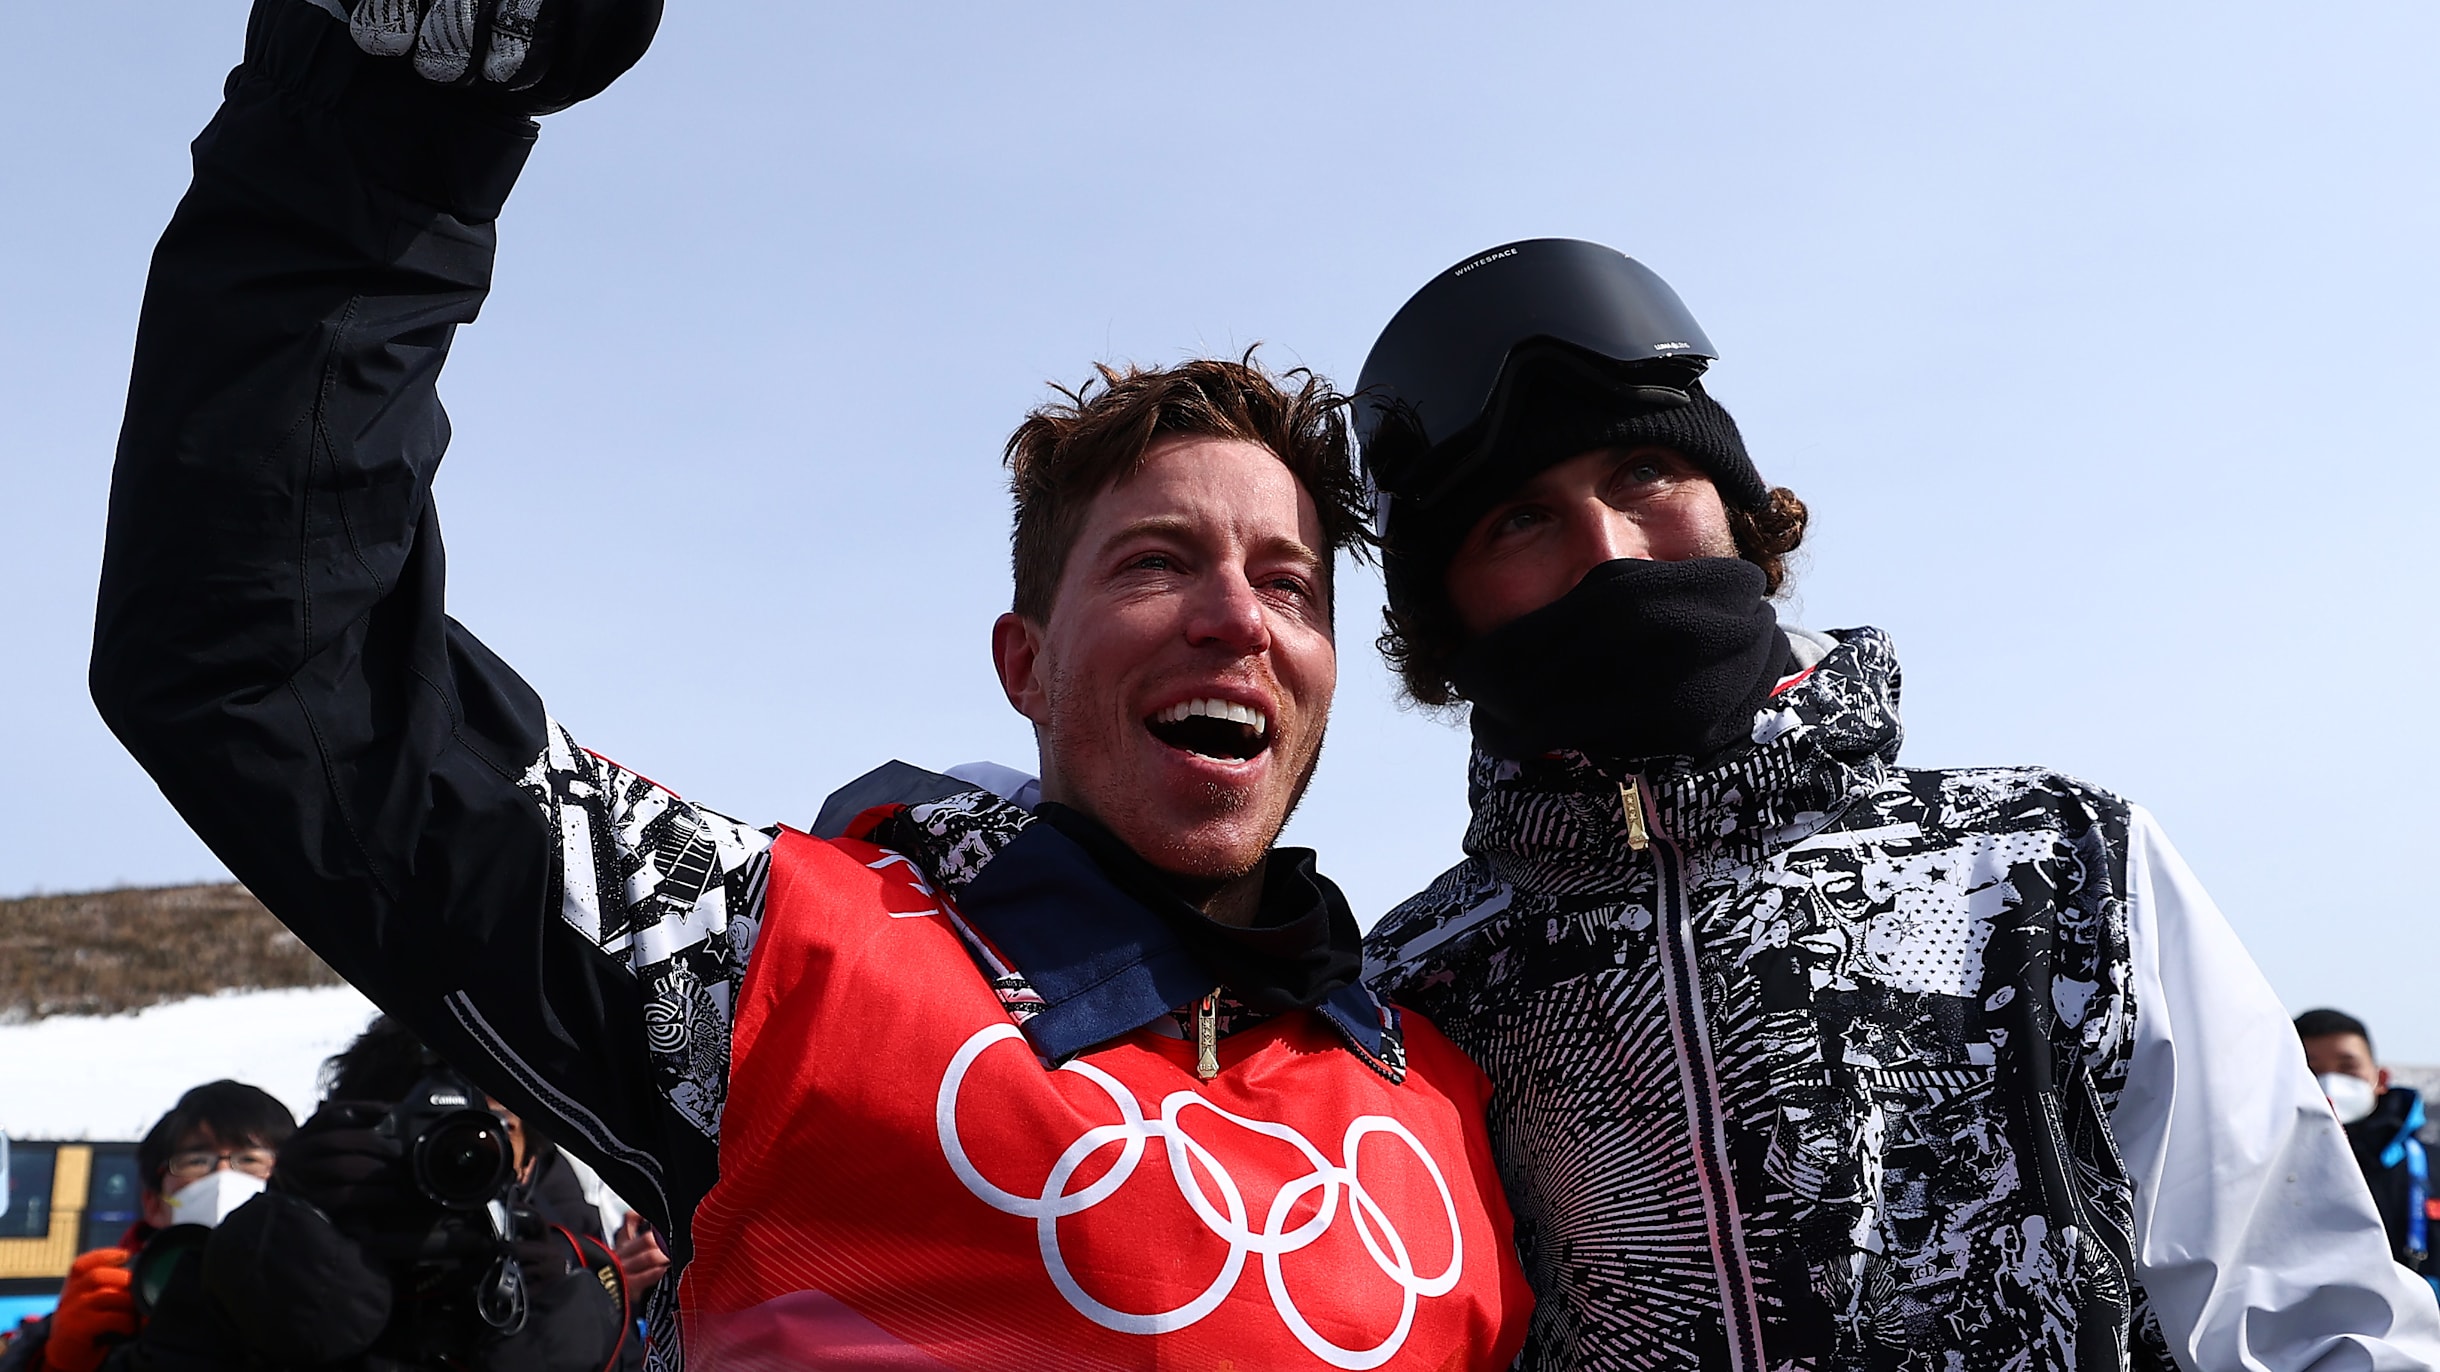 Winter Olympics 2018: Coach of Shaun White is from Memphis